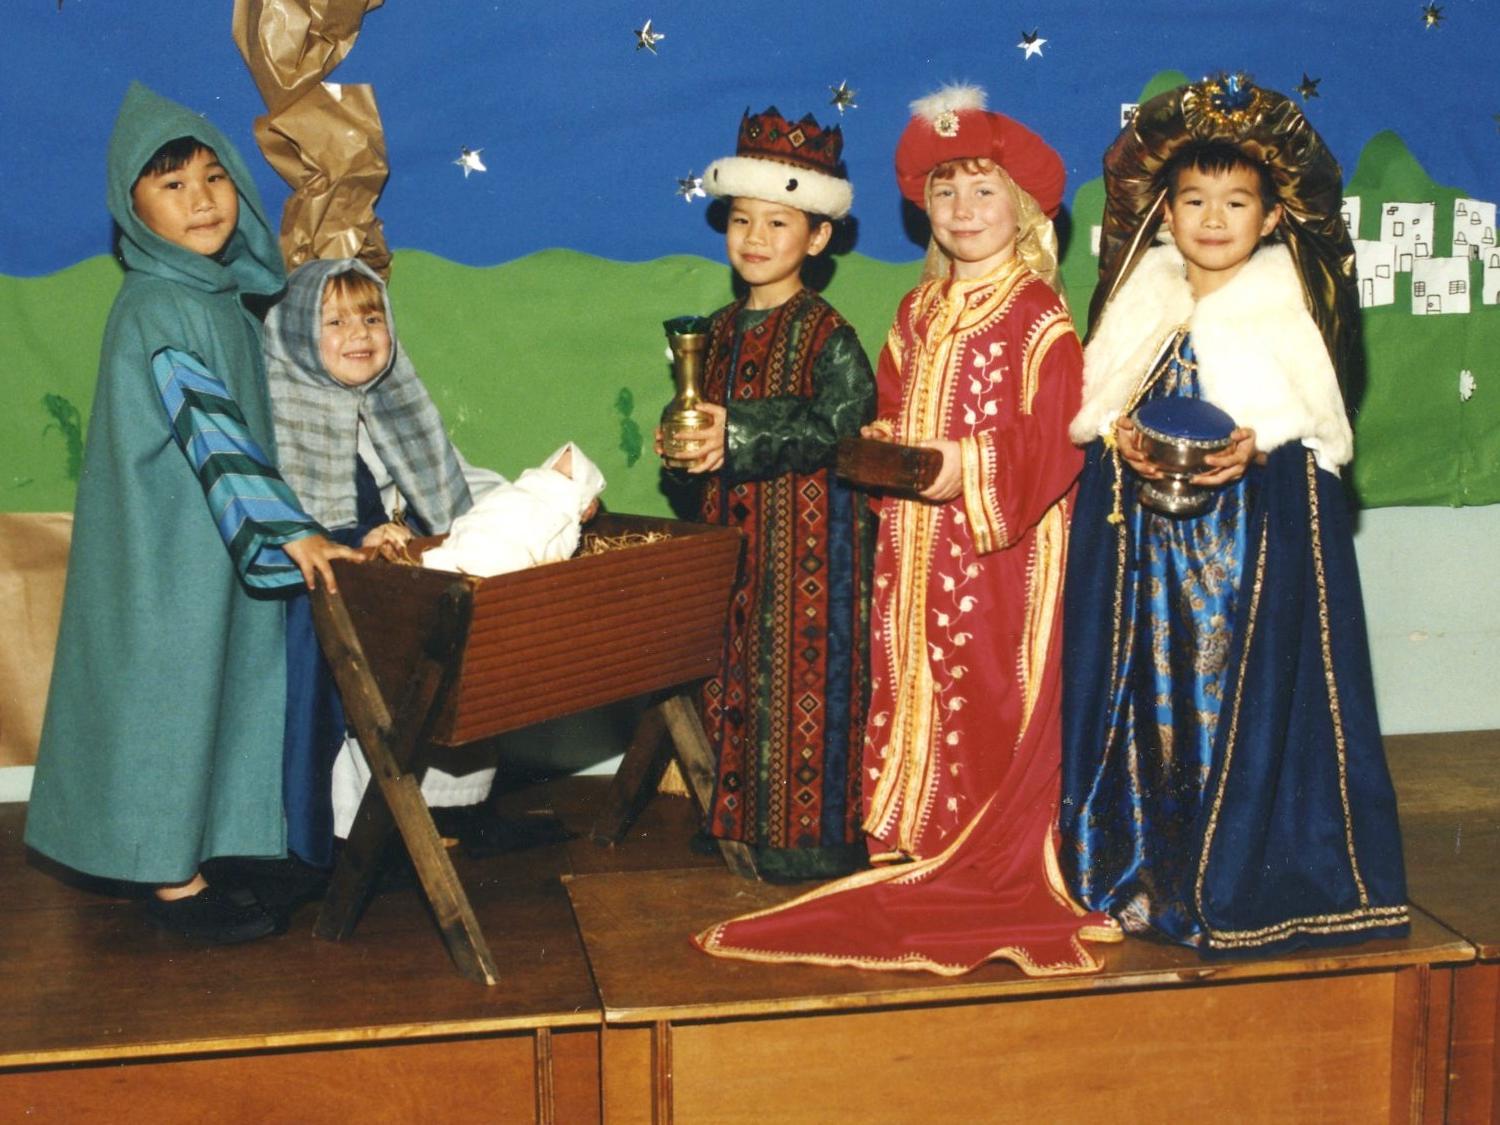 An undated scene from a Rossall School Nativity